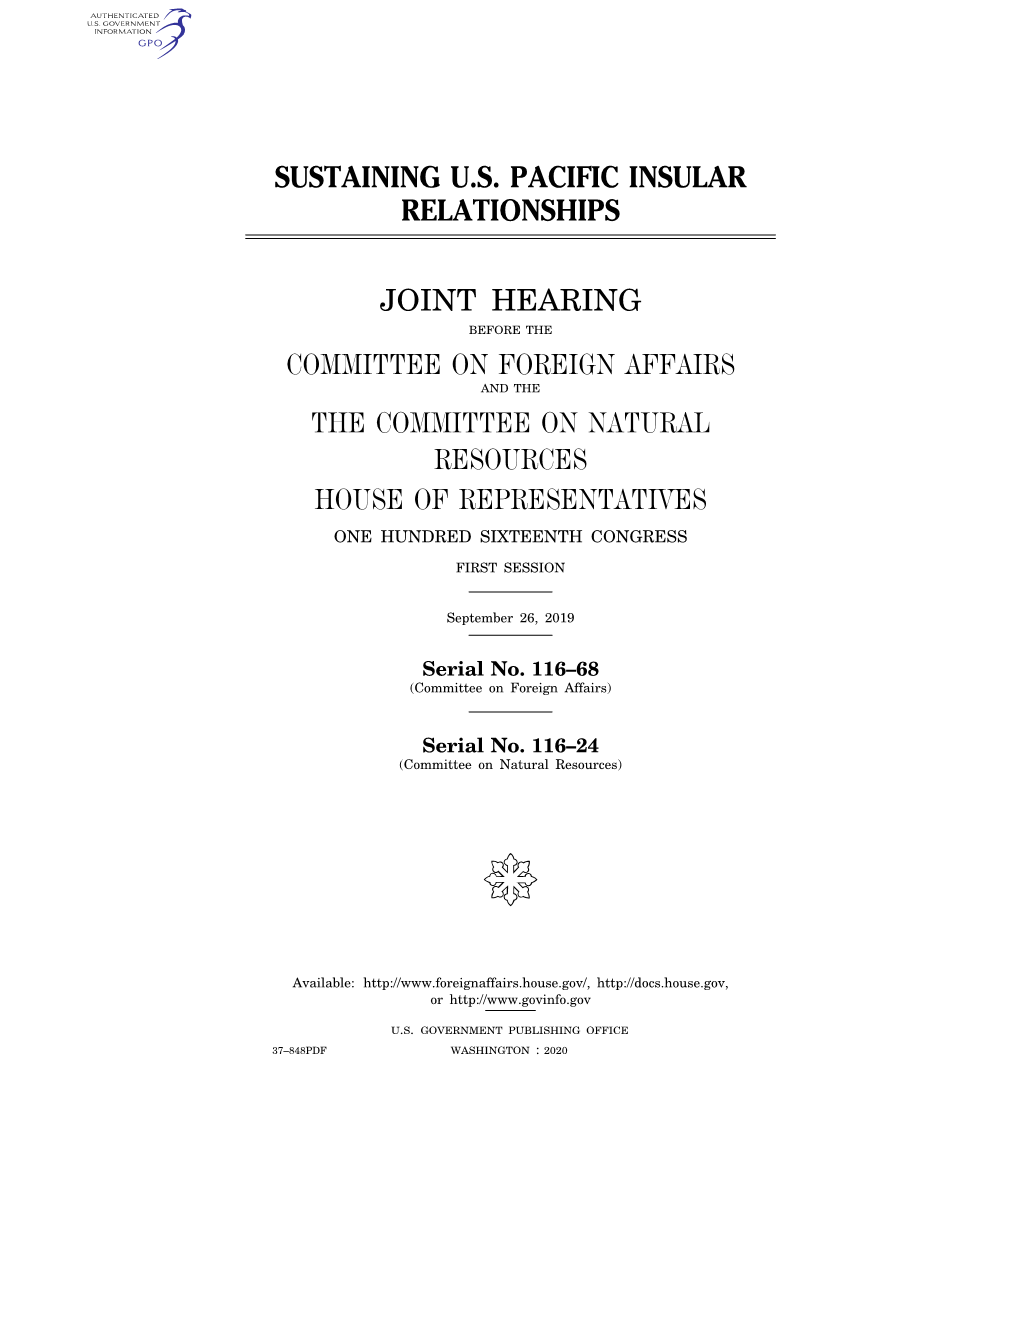 Sustaining U.S. Pacific Insular Relationships Joint Hearing